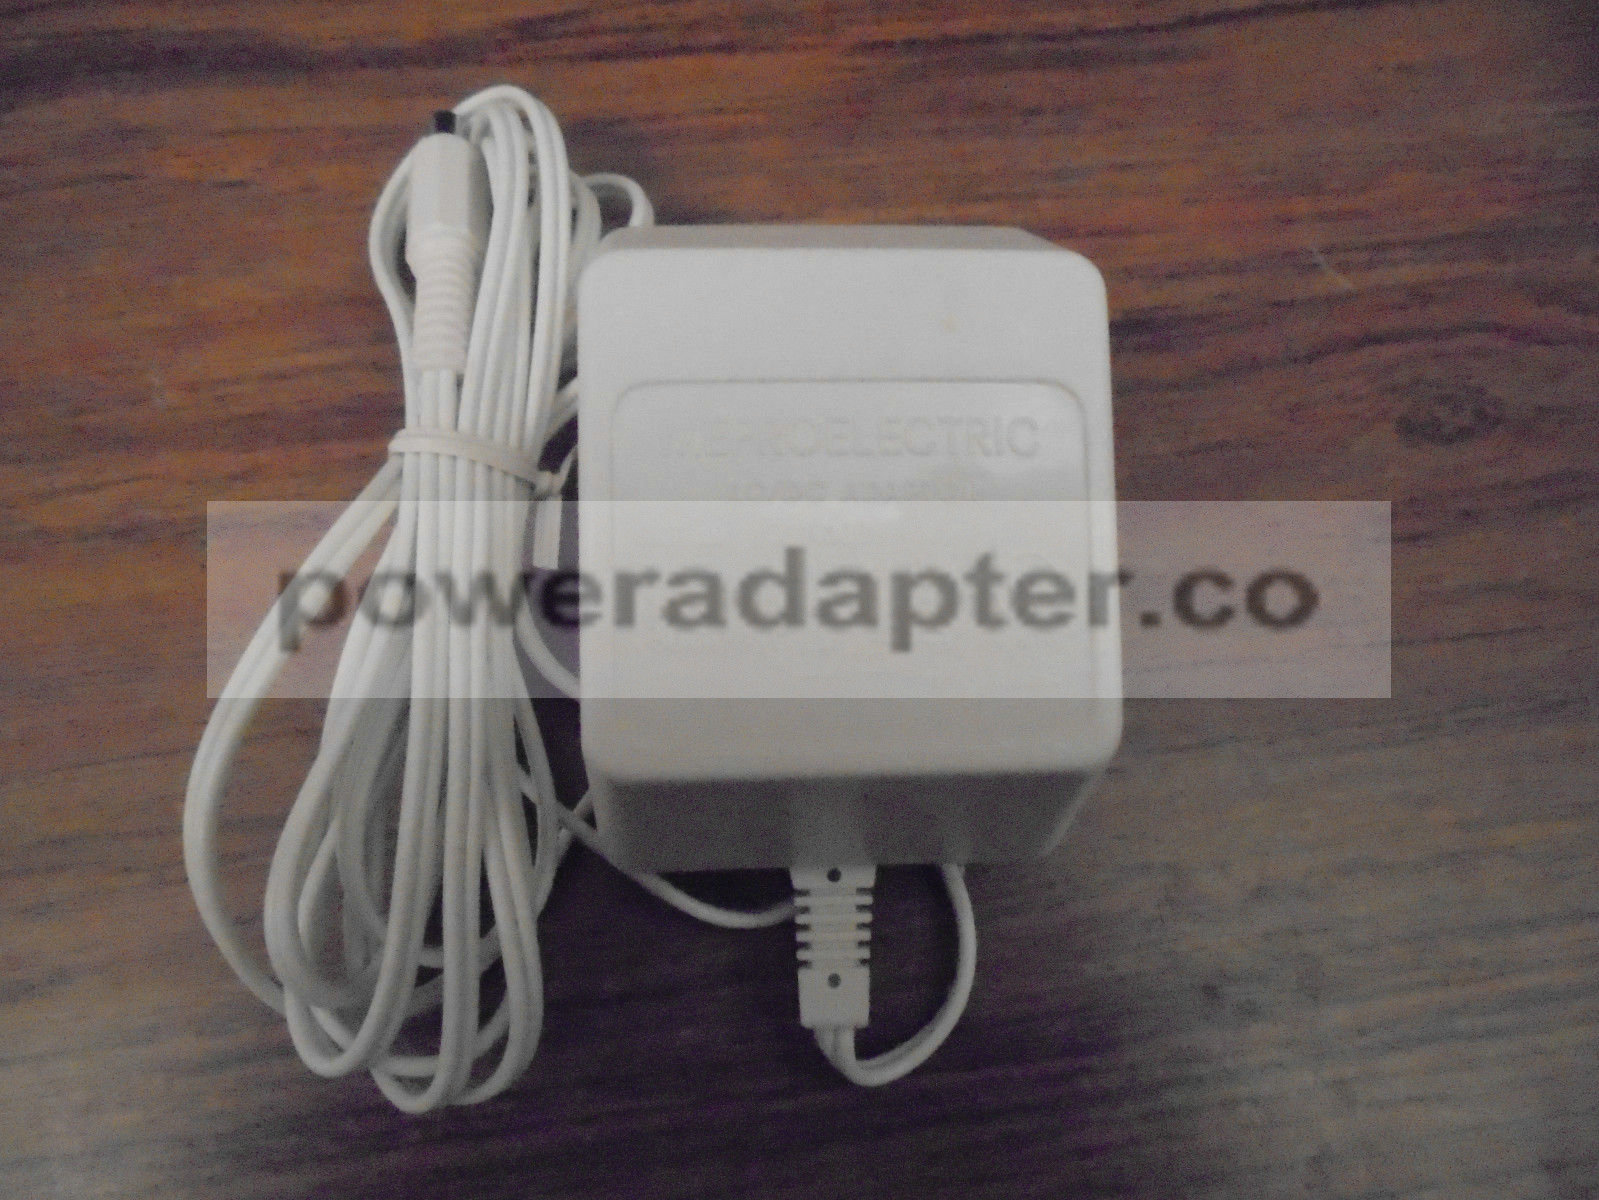 Meproelectric AC/DC Adaptor 8311000 Input: 120V Output: DC 12V 0.3A Condition: Used: An item that has been used prev